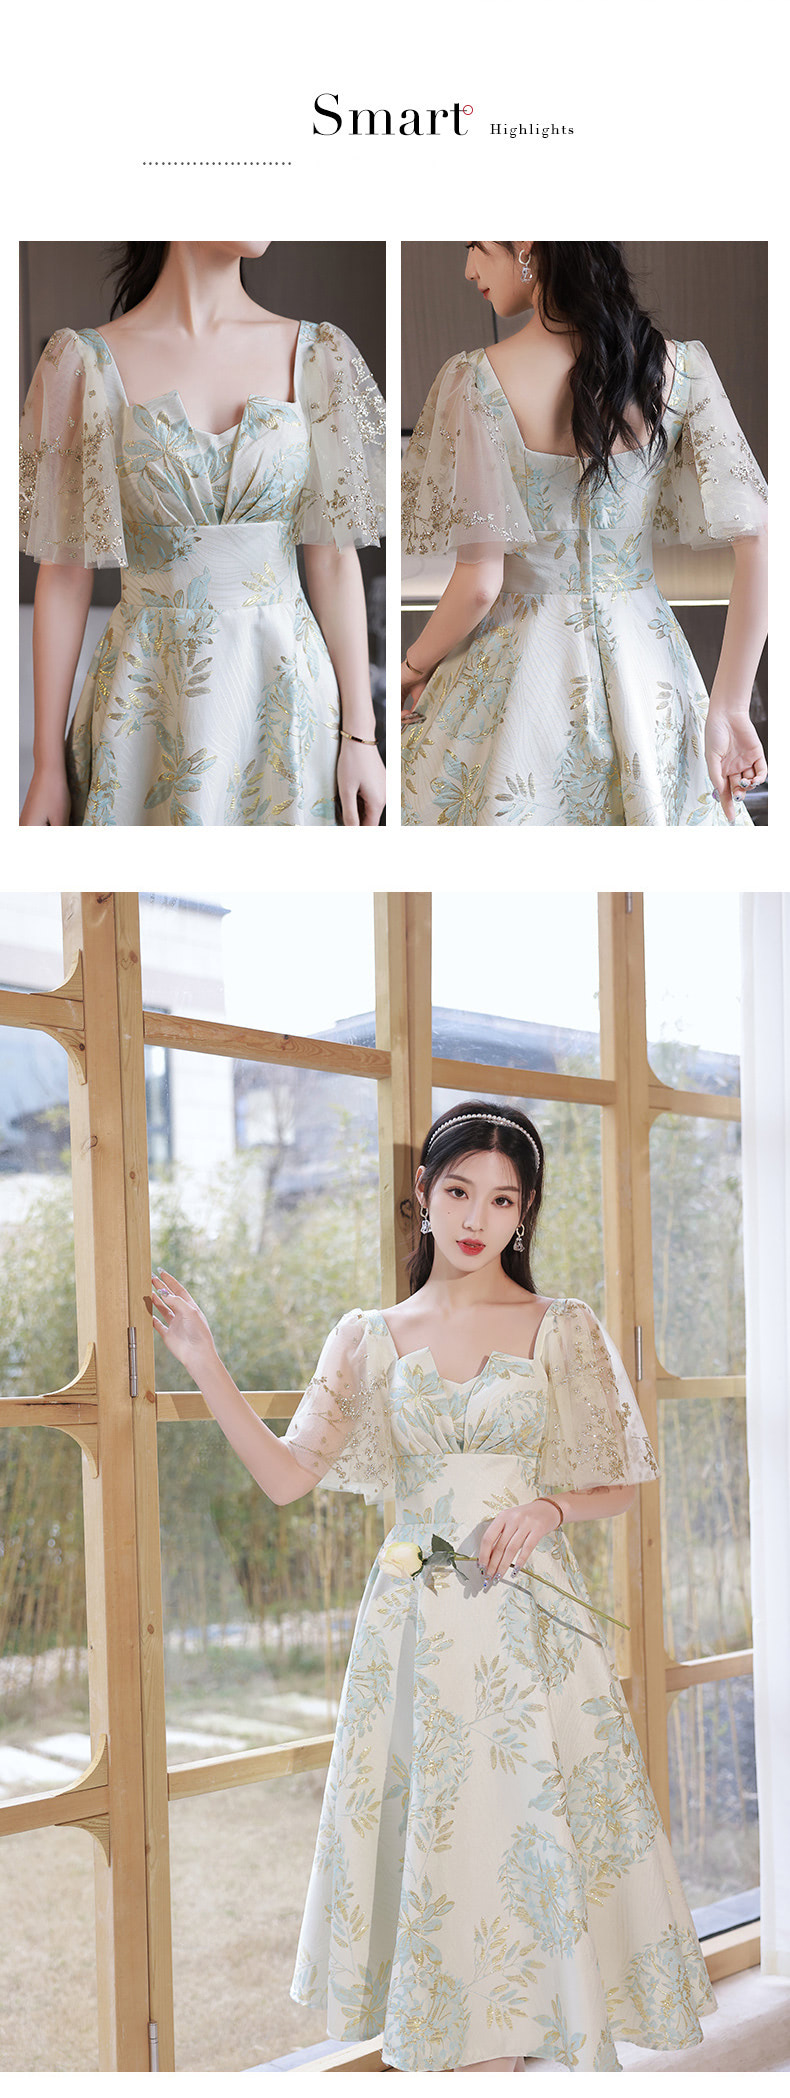 A-Line-Boutique-Floral-Printed-Midi-Prom-Dress-with-Short-Sleeves12.jpg